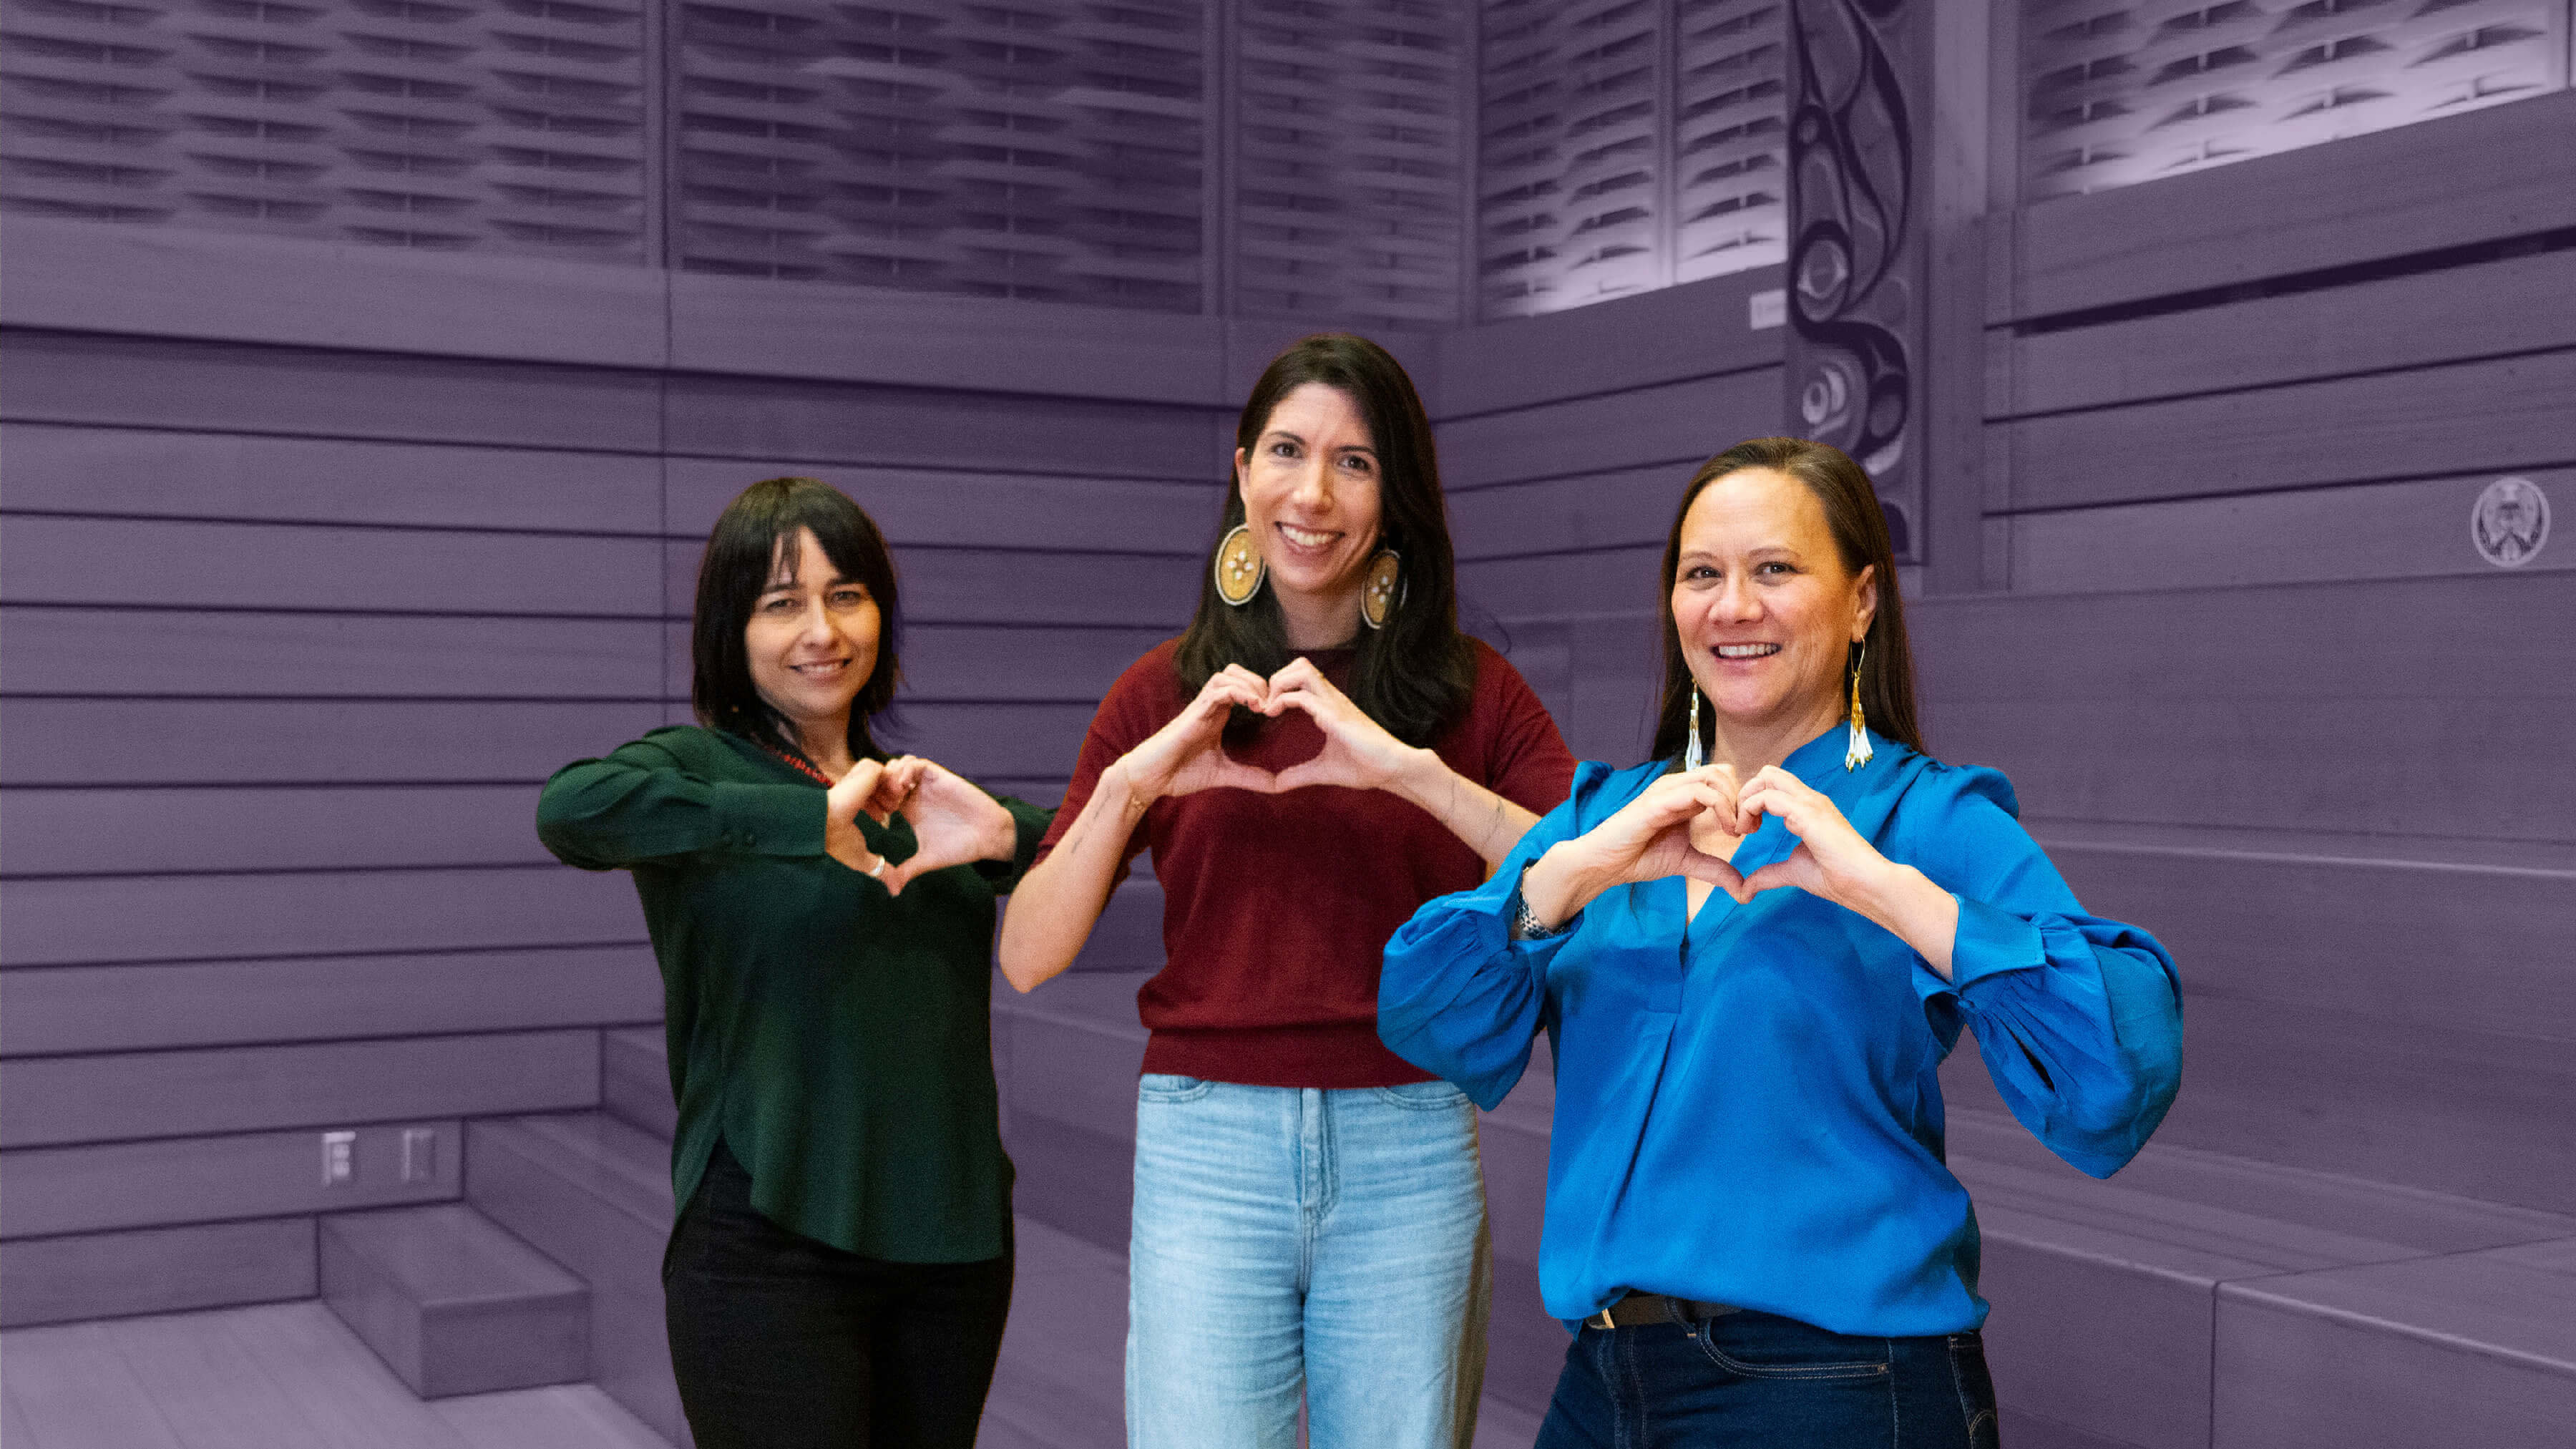 Three women face the camera smiling while giving a heart hand symbol.